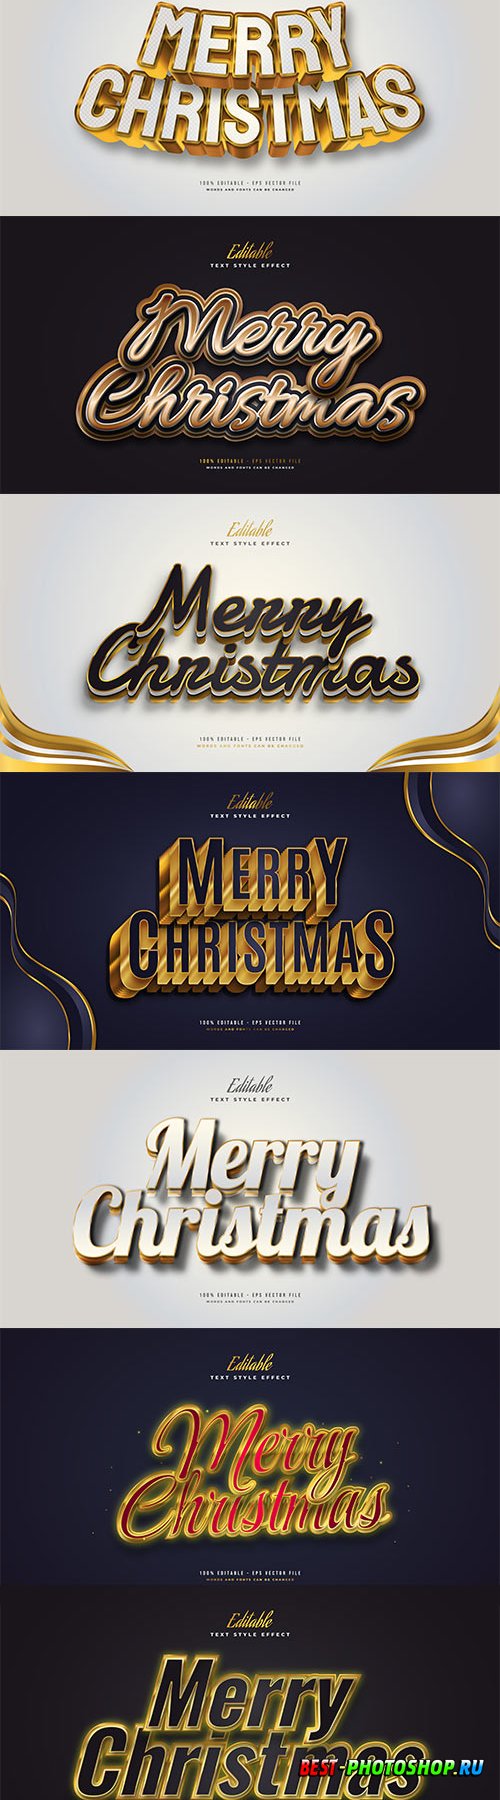 Merry christmas and happy new year 2022 editable vector text effects vol 21